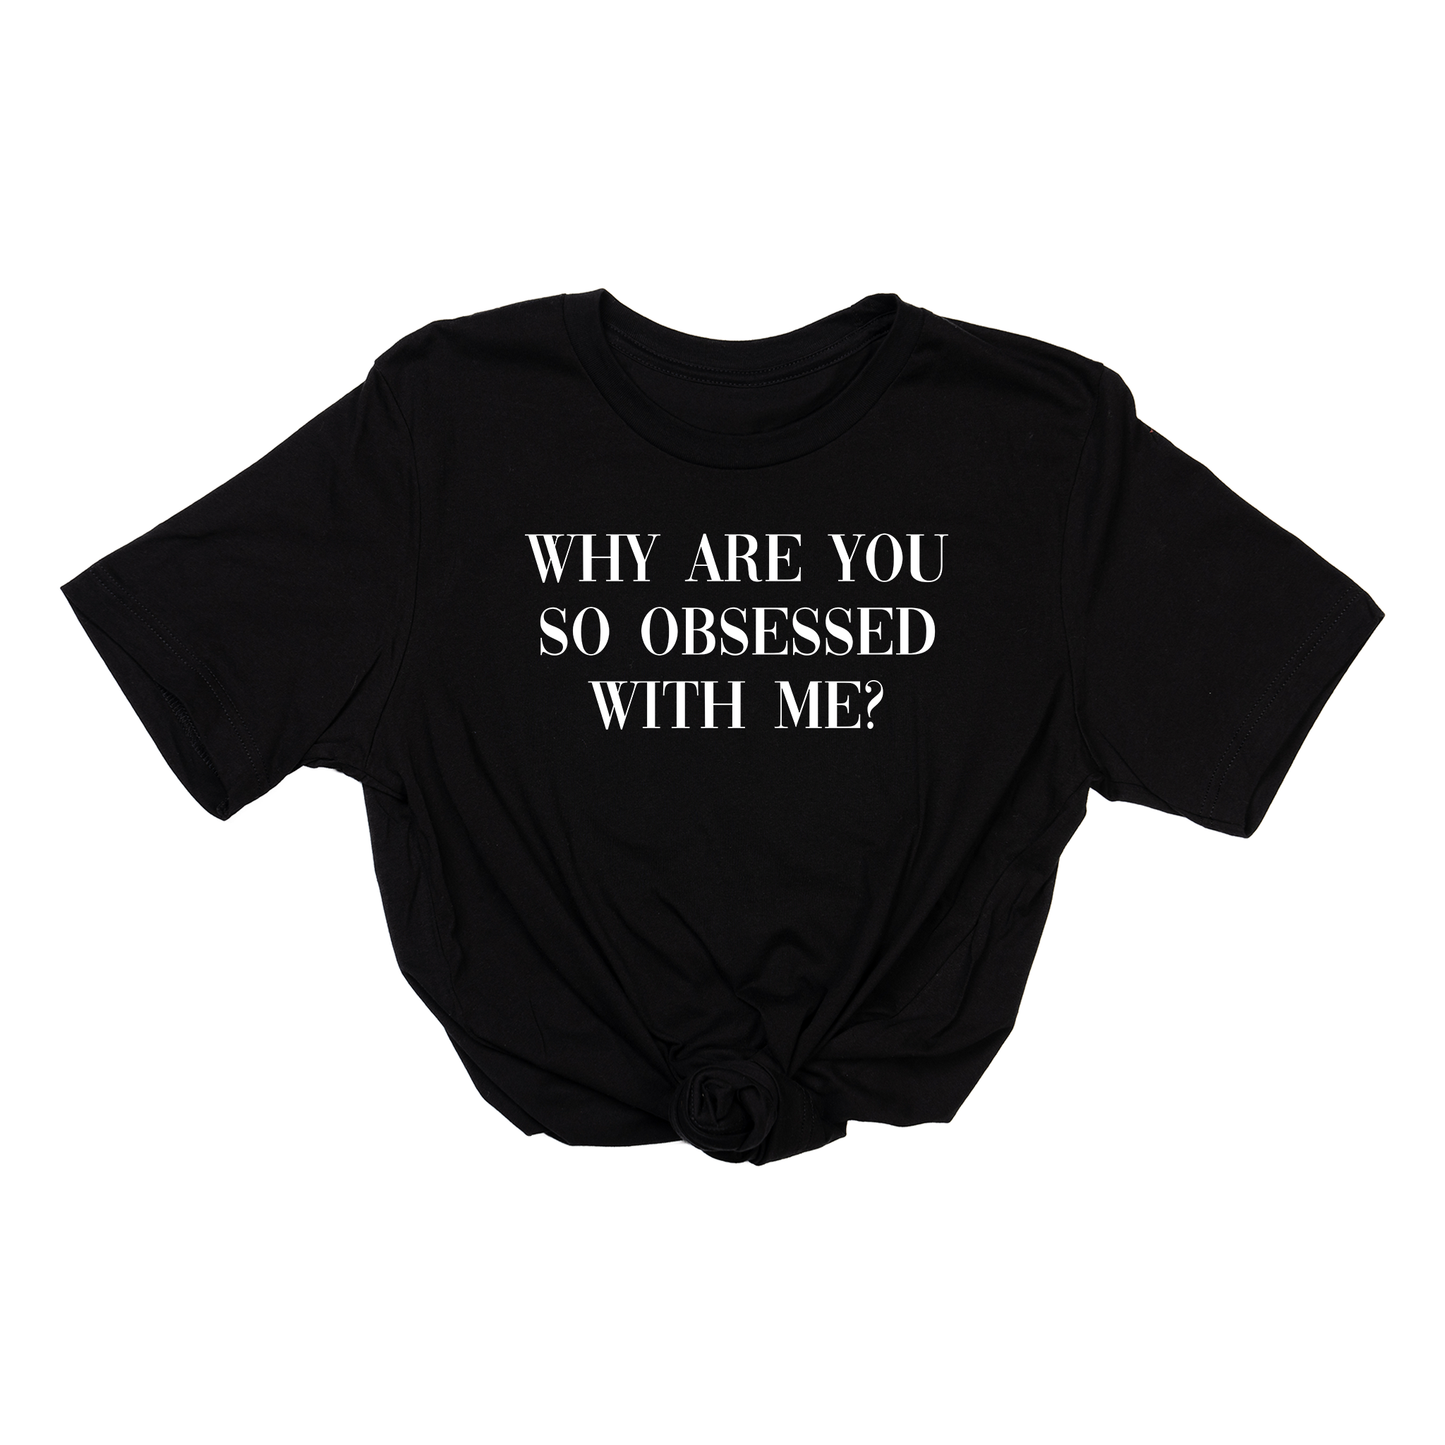 Why are you so obsessed with me (White) - Tee (Black)